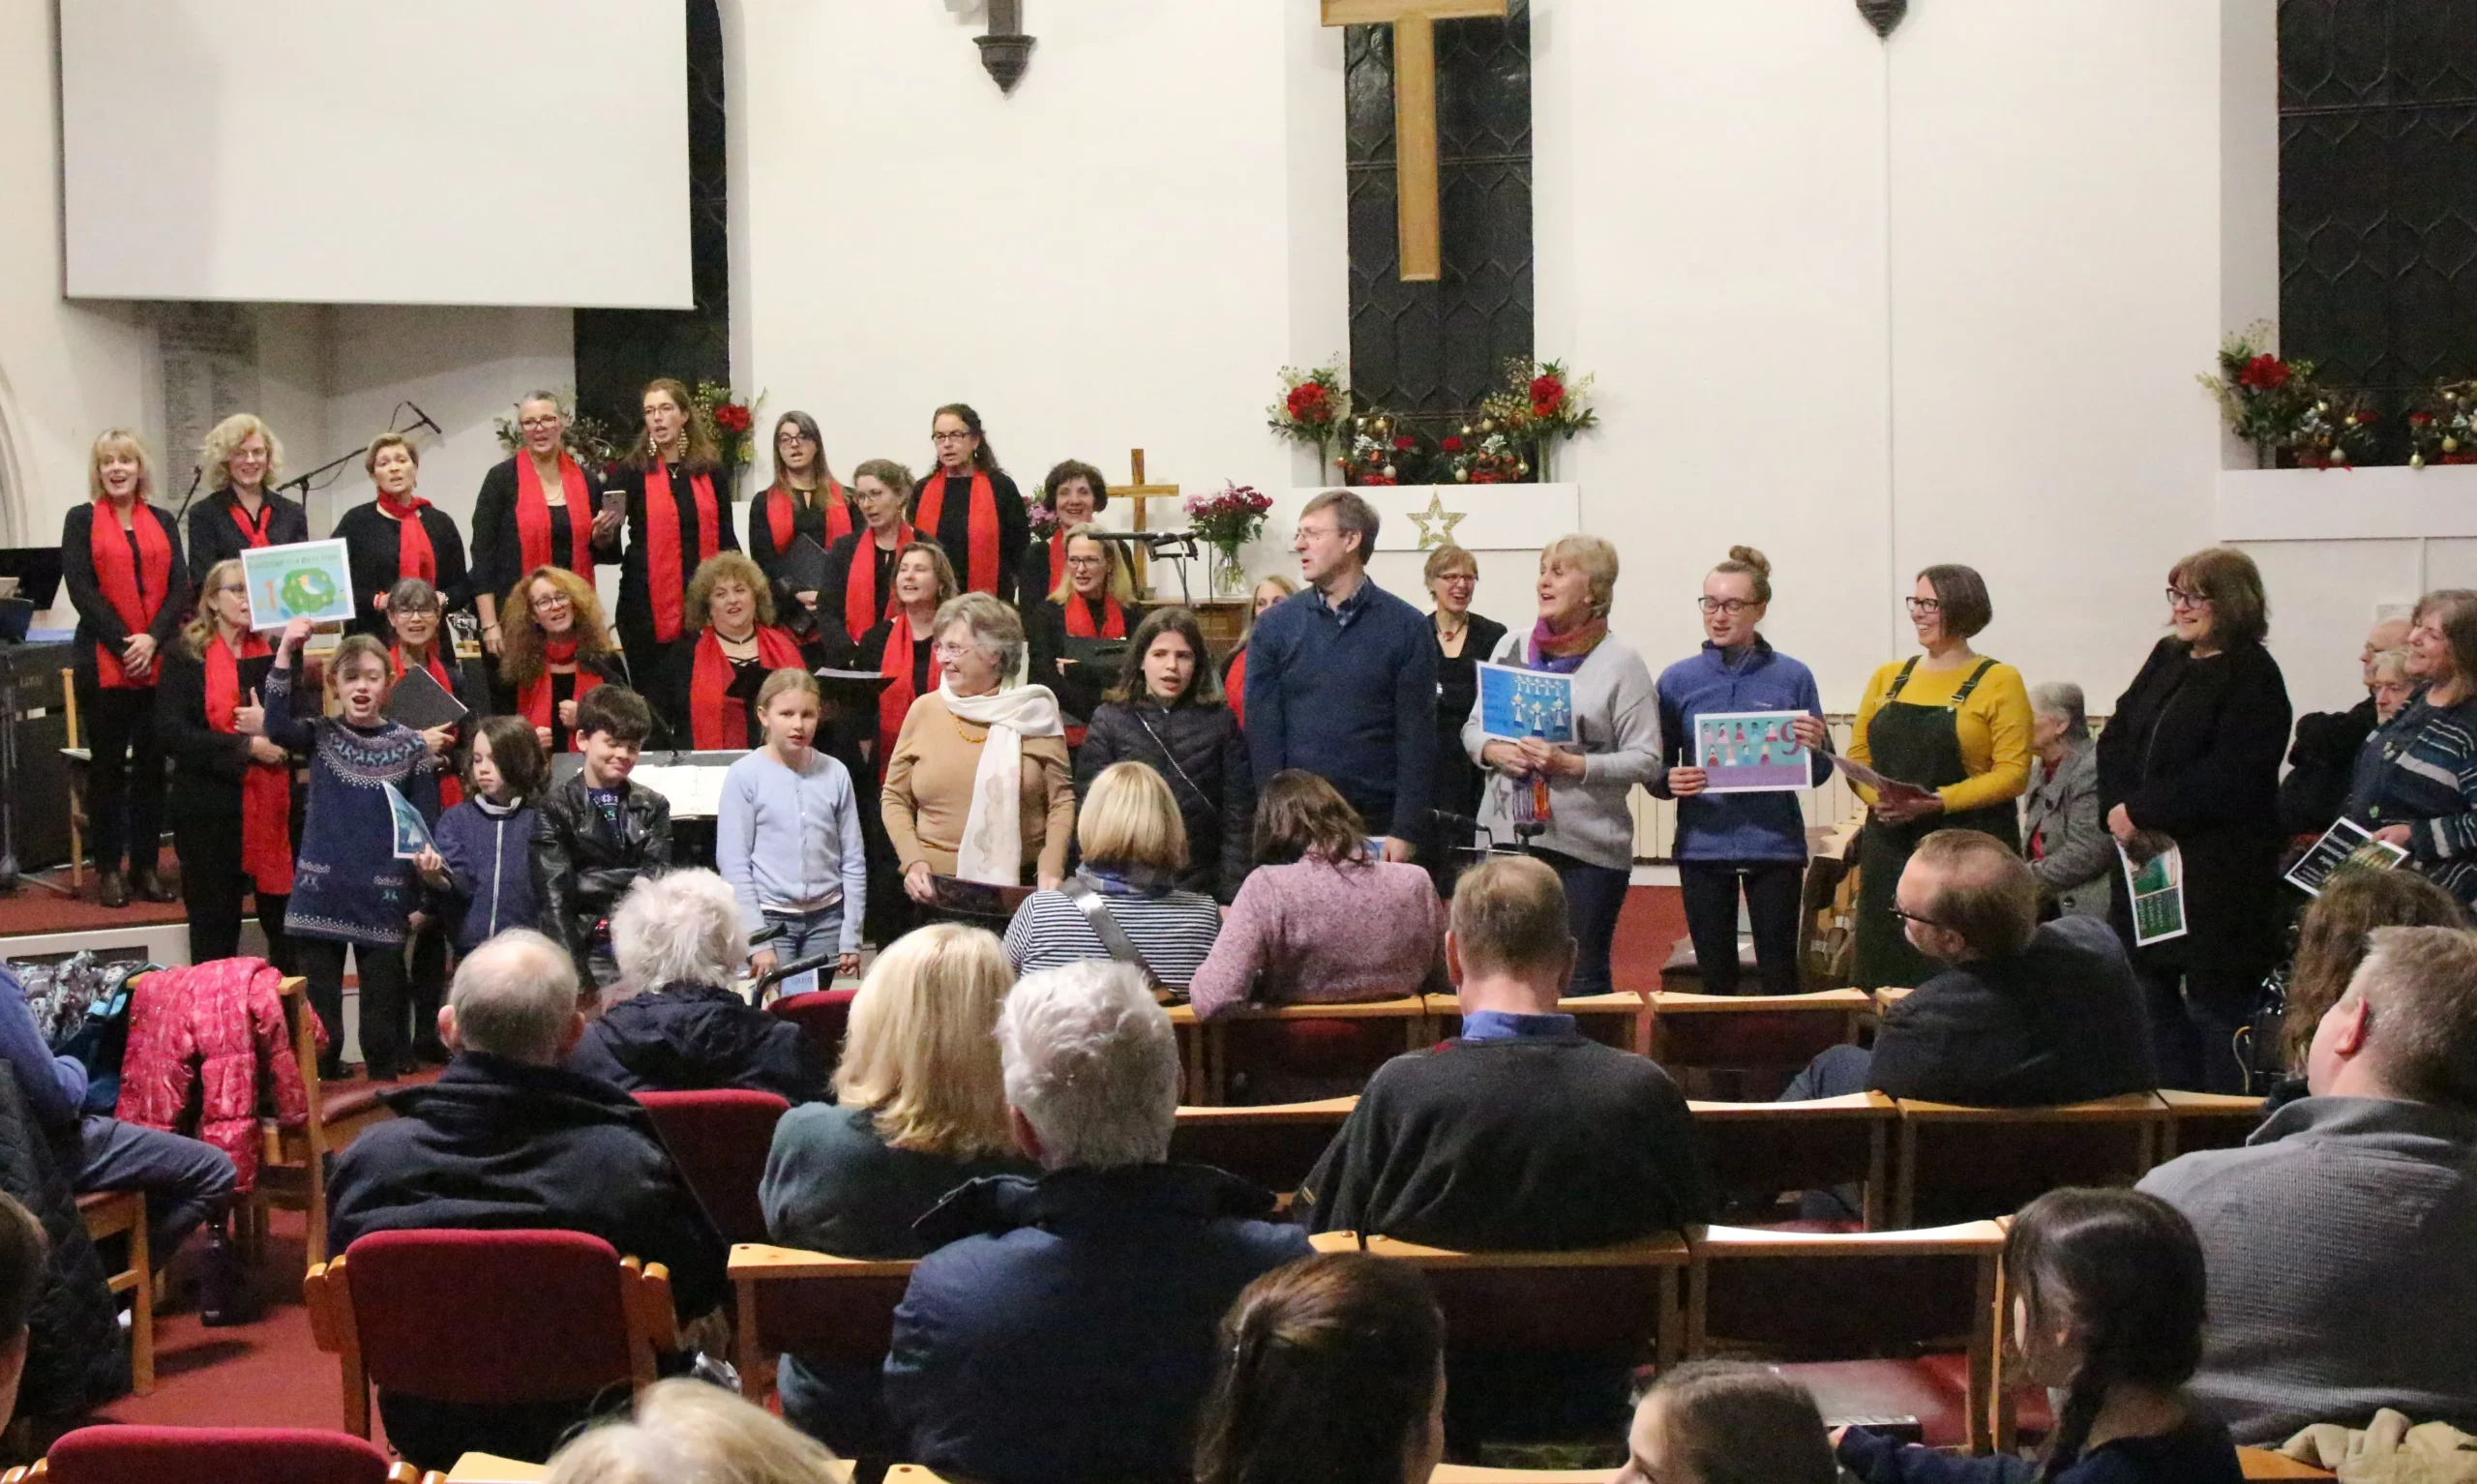 A diverse group of people in a church, with a choir and audience singing joyfully together.